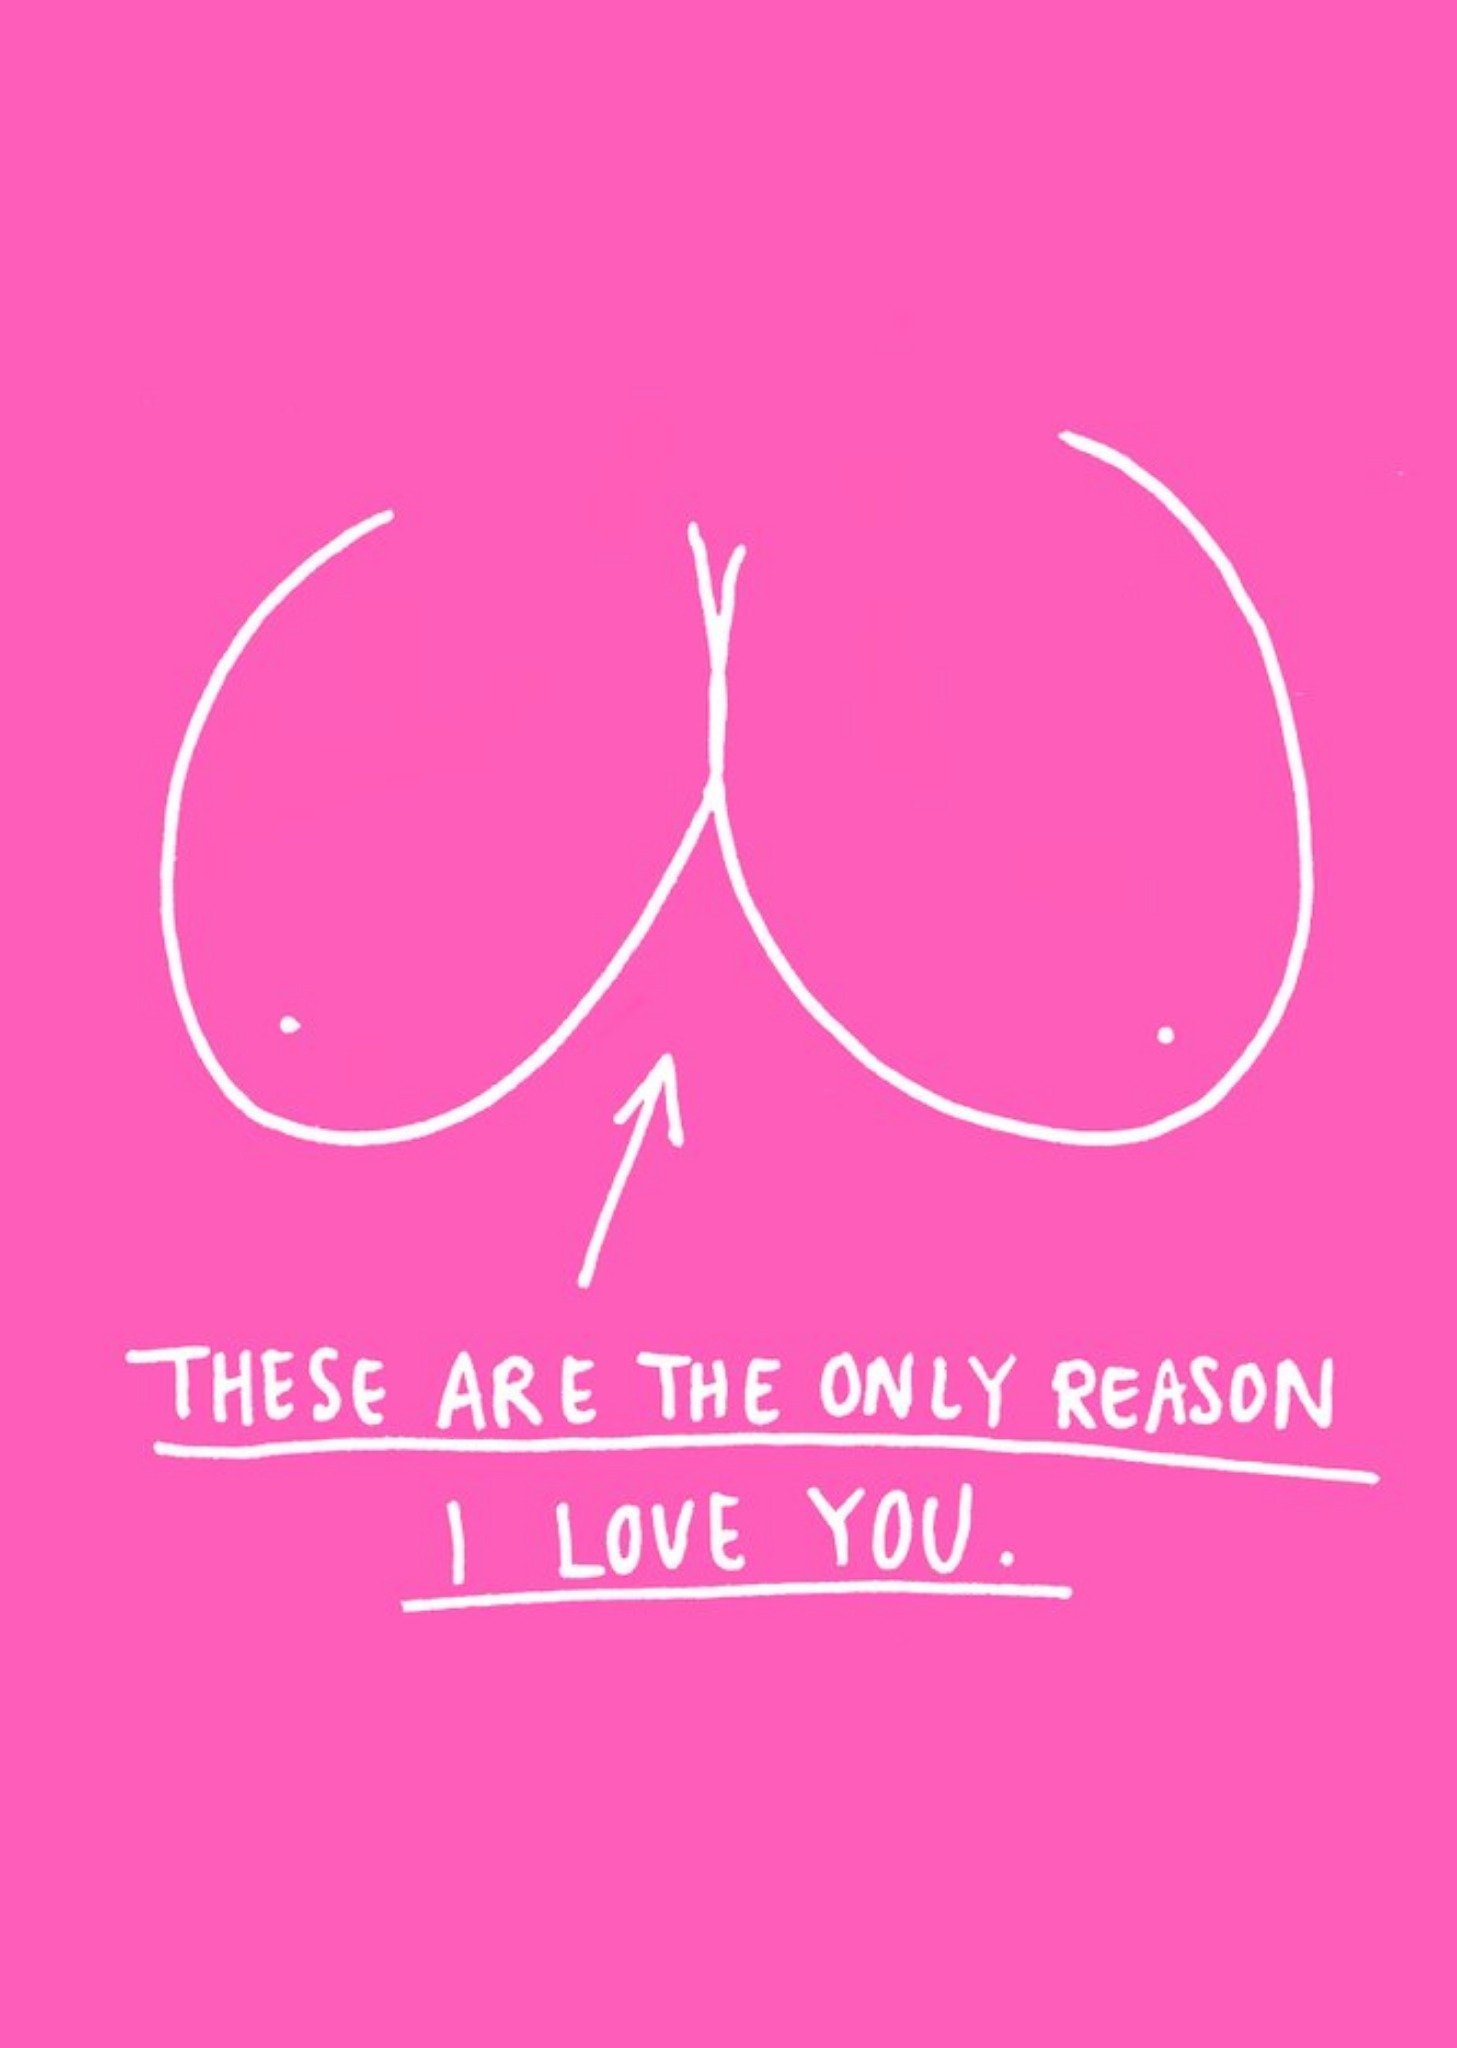 Moonpig Funny Cheeky Rude The Only Reason I Love You Boobs Card, Large